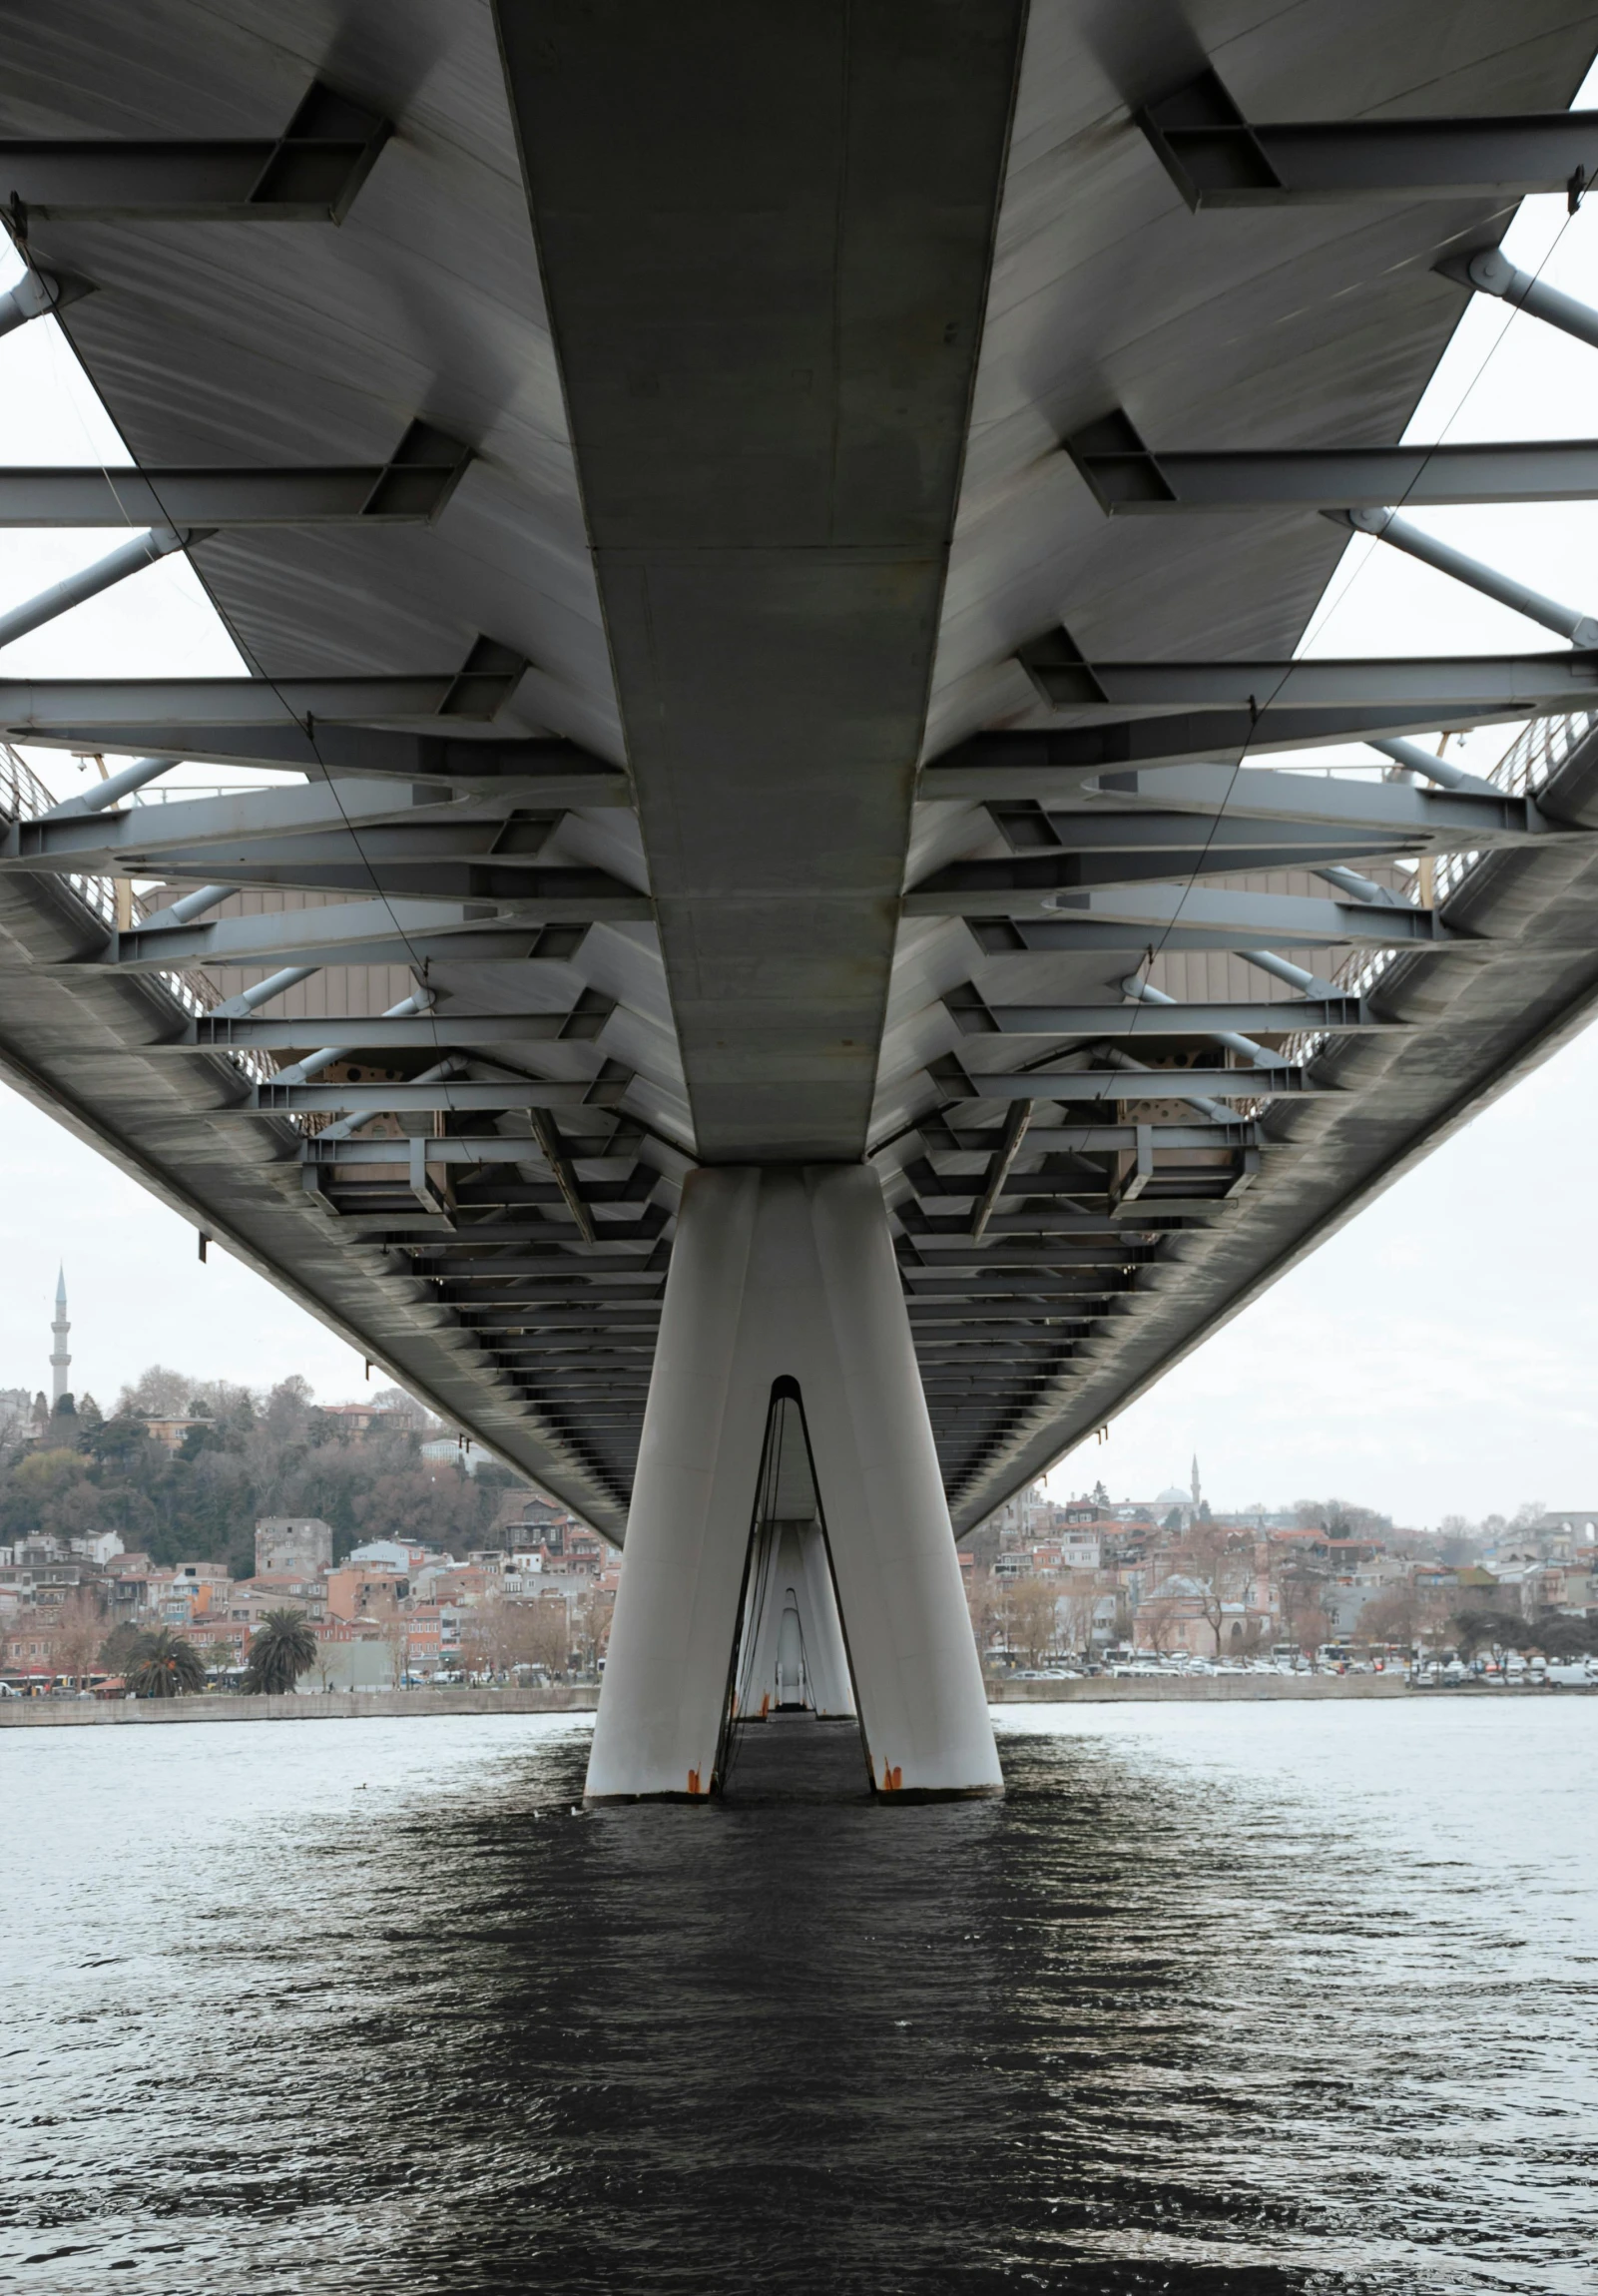 the underside of a bridge over a body of water, istanbul, slide show, grey, large tall